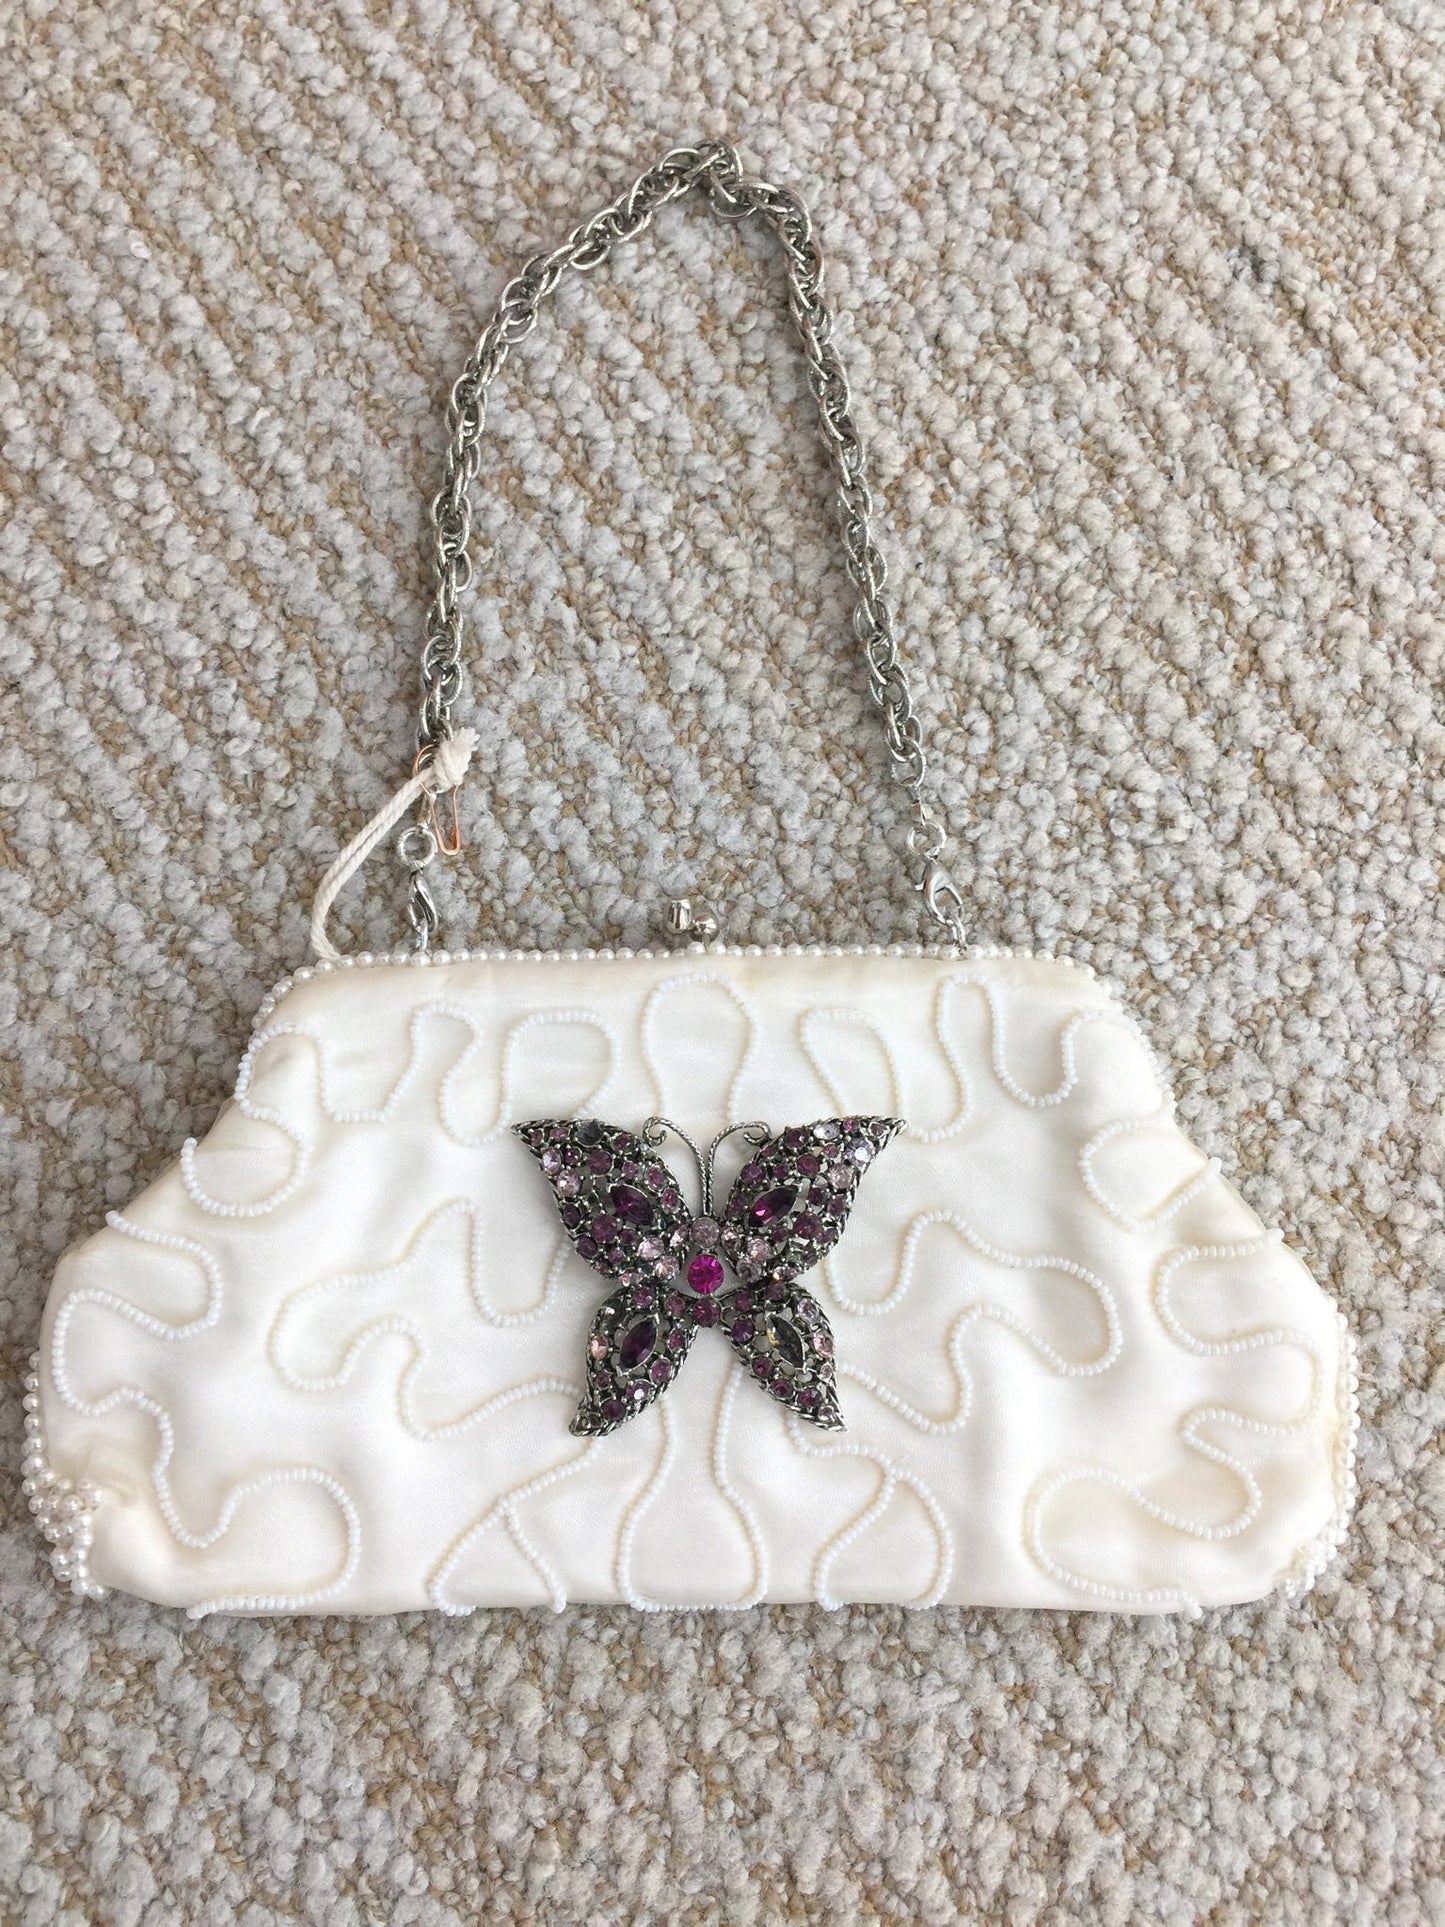 LS Upcycled Vintage Beaded Butterfly Pin Purse